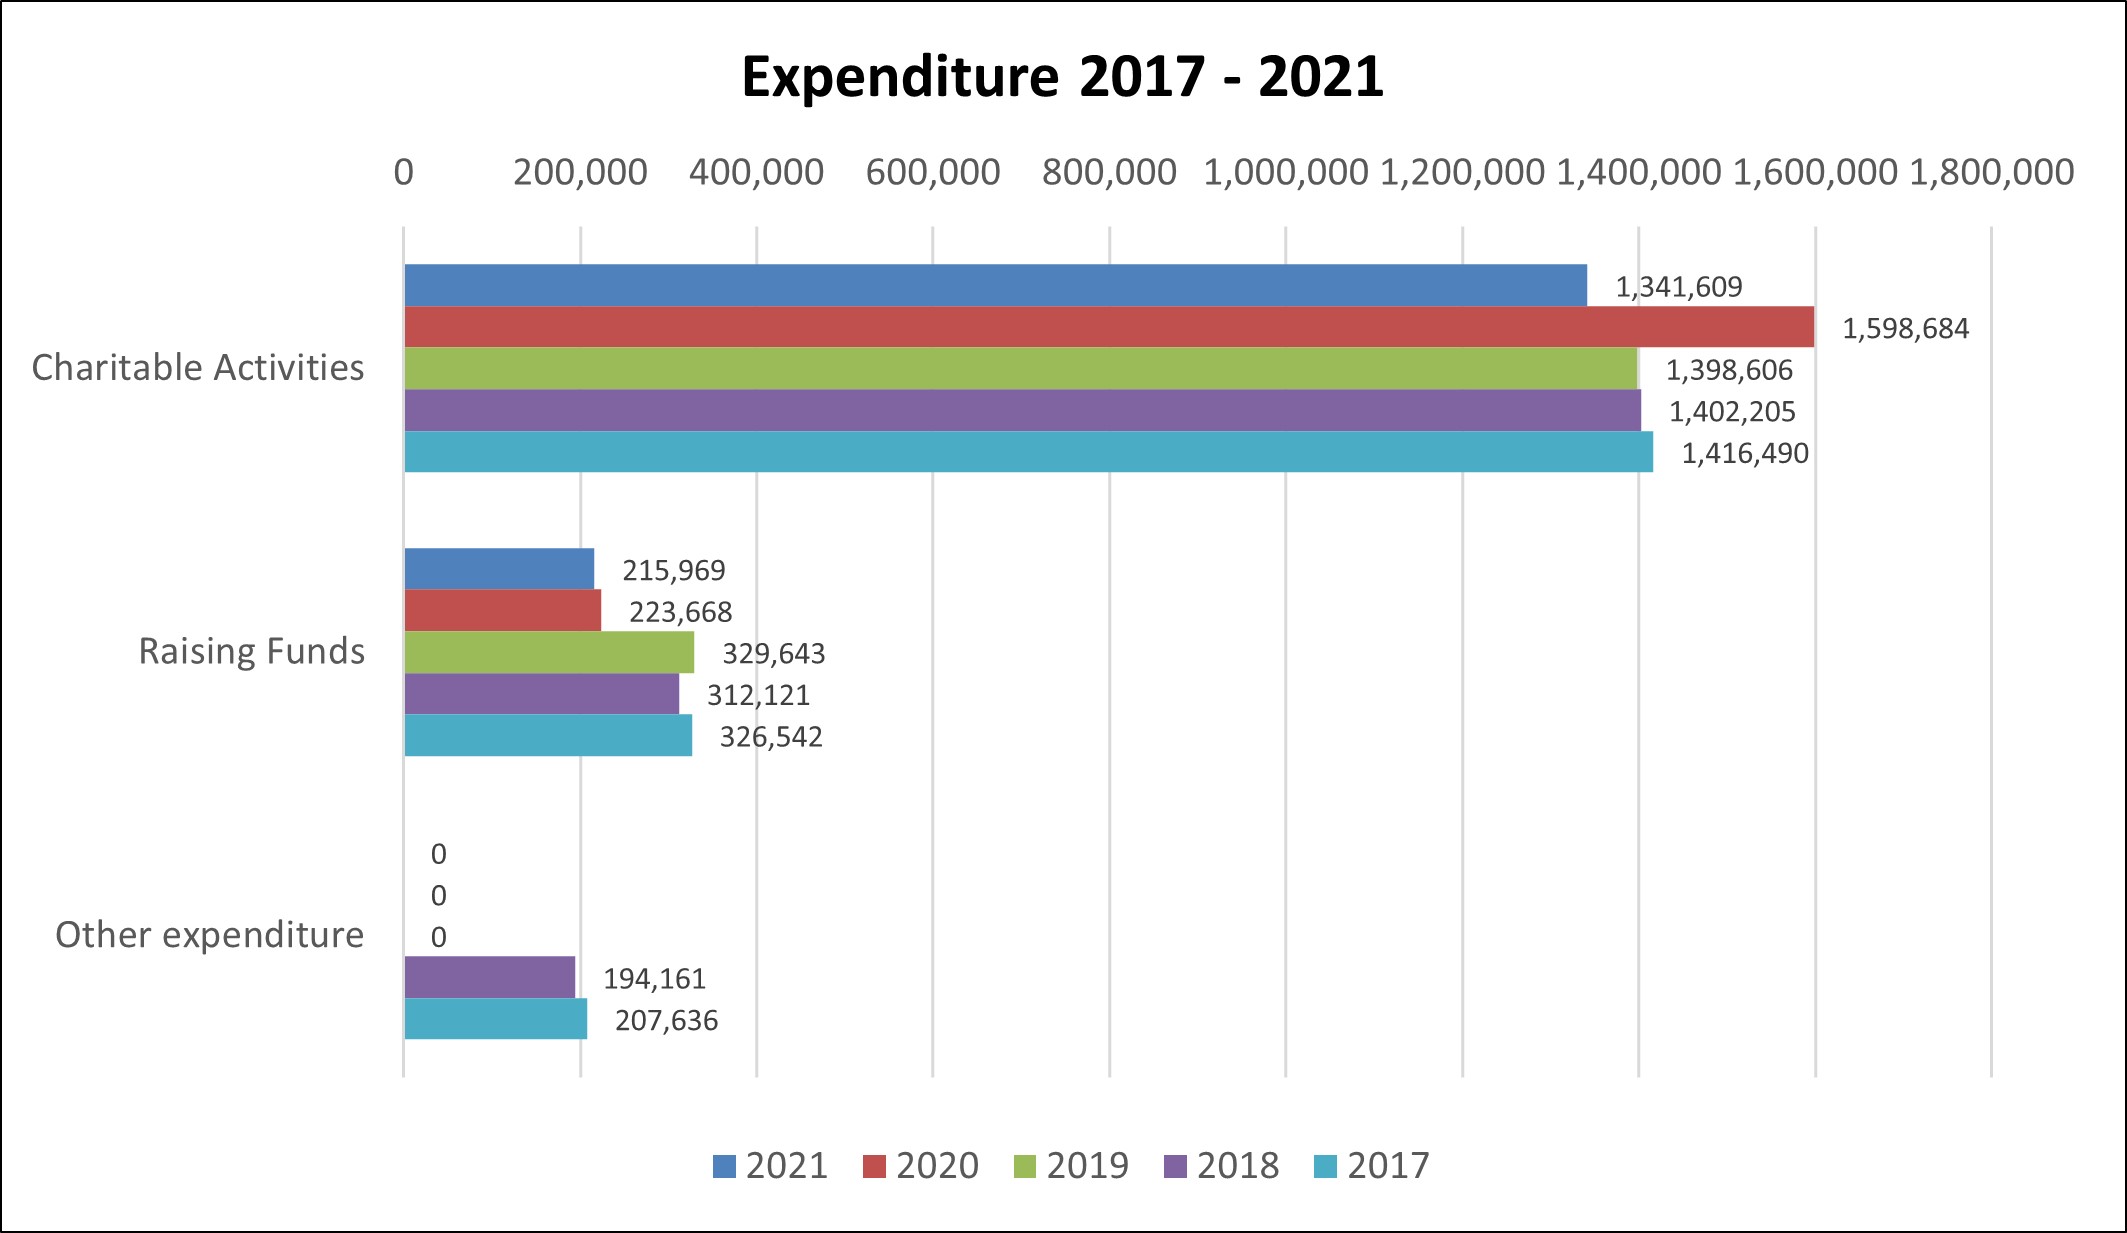 Chart showing Epilepsy Ireland expenditure over the last 5 years